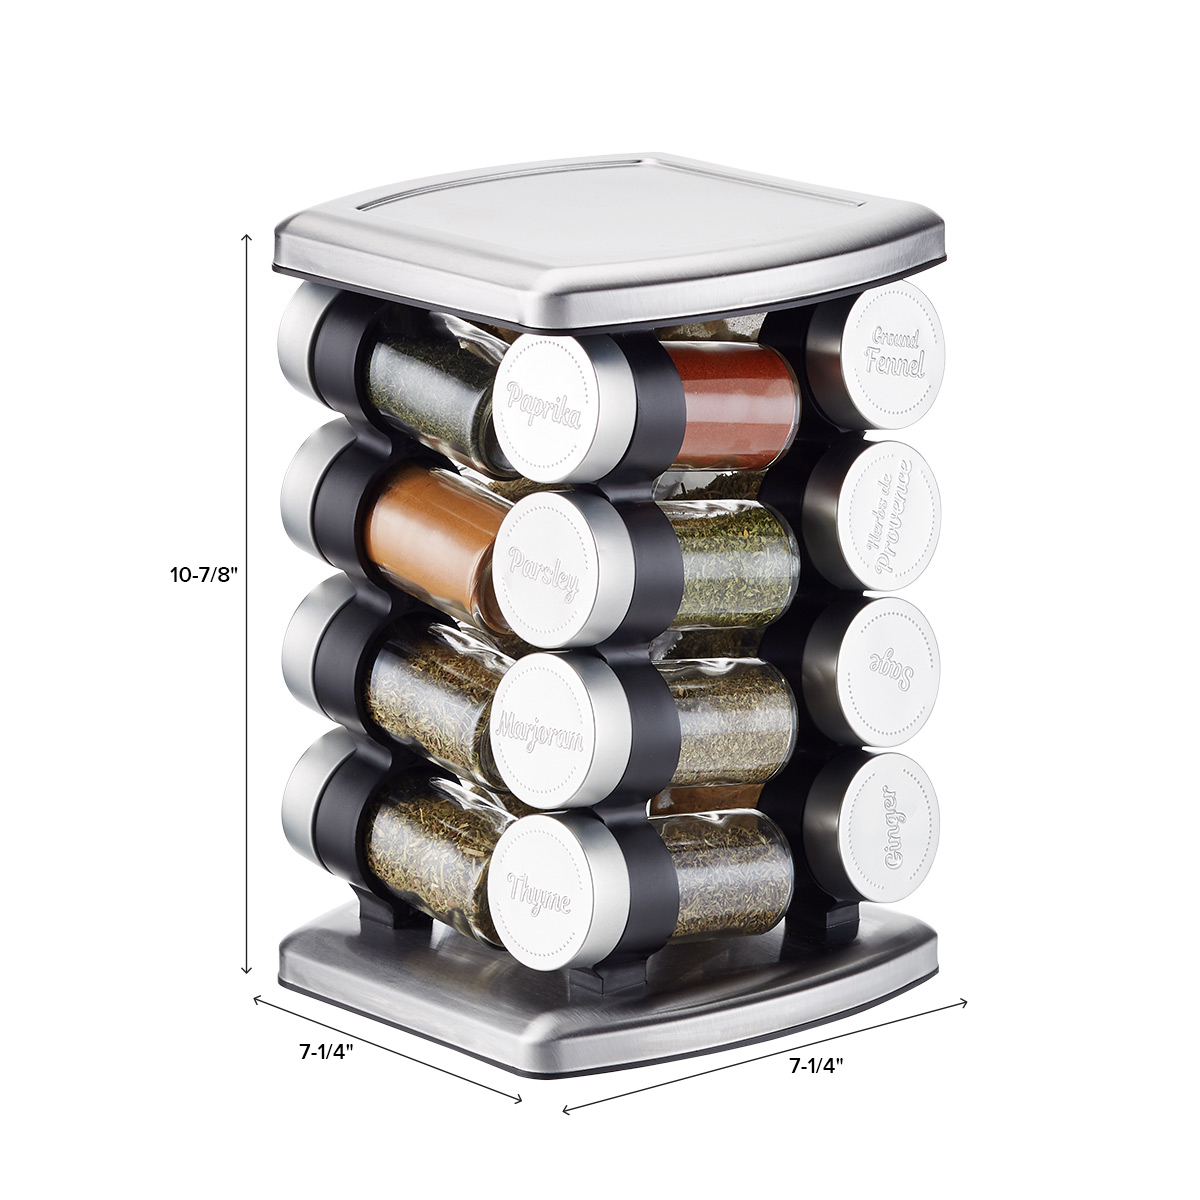 https://www.containerstore.com/catalogimages/447733/10079017-16-bottle-revolving-spice-r.jpg